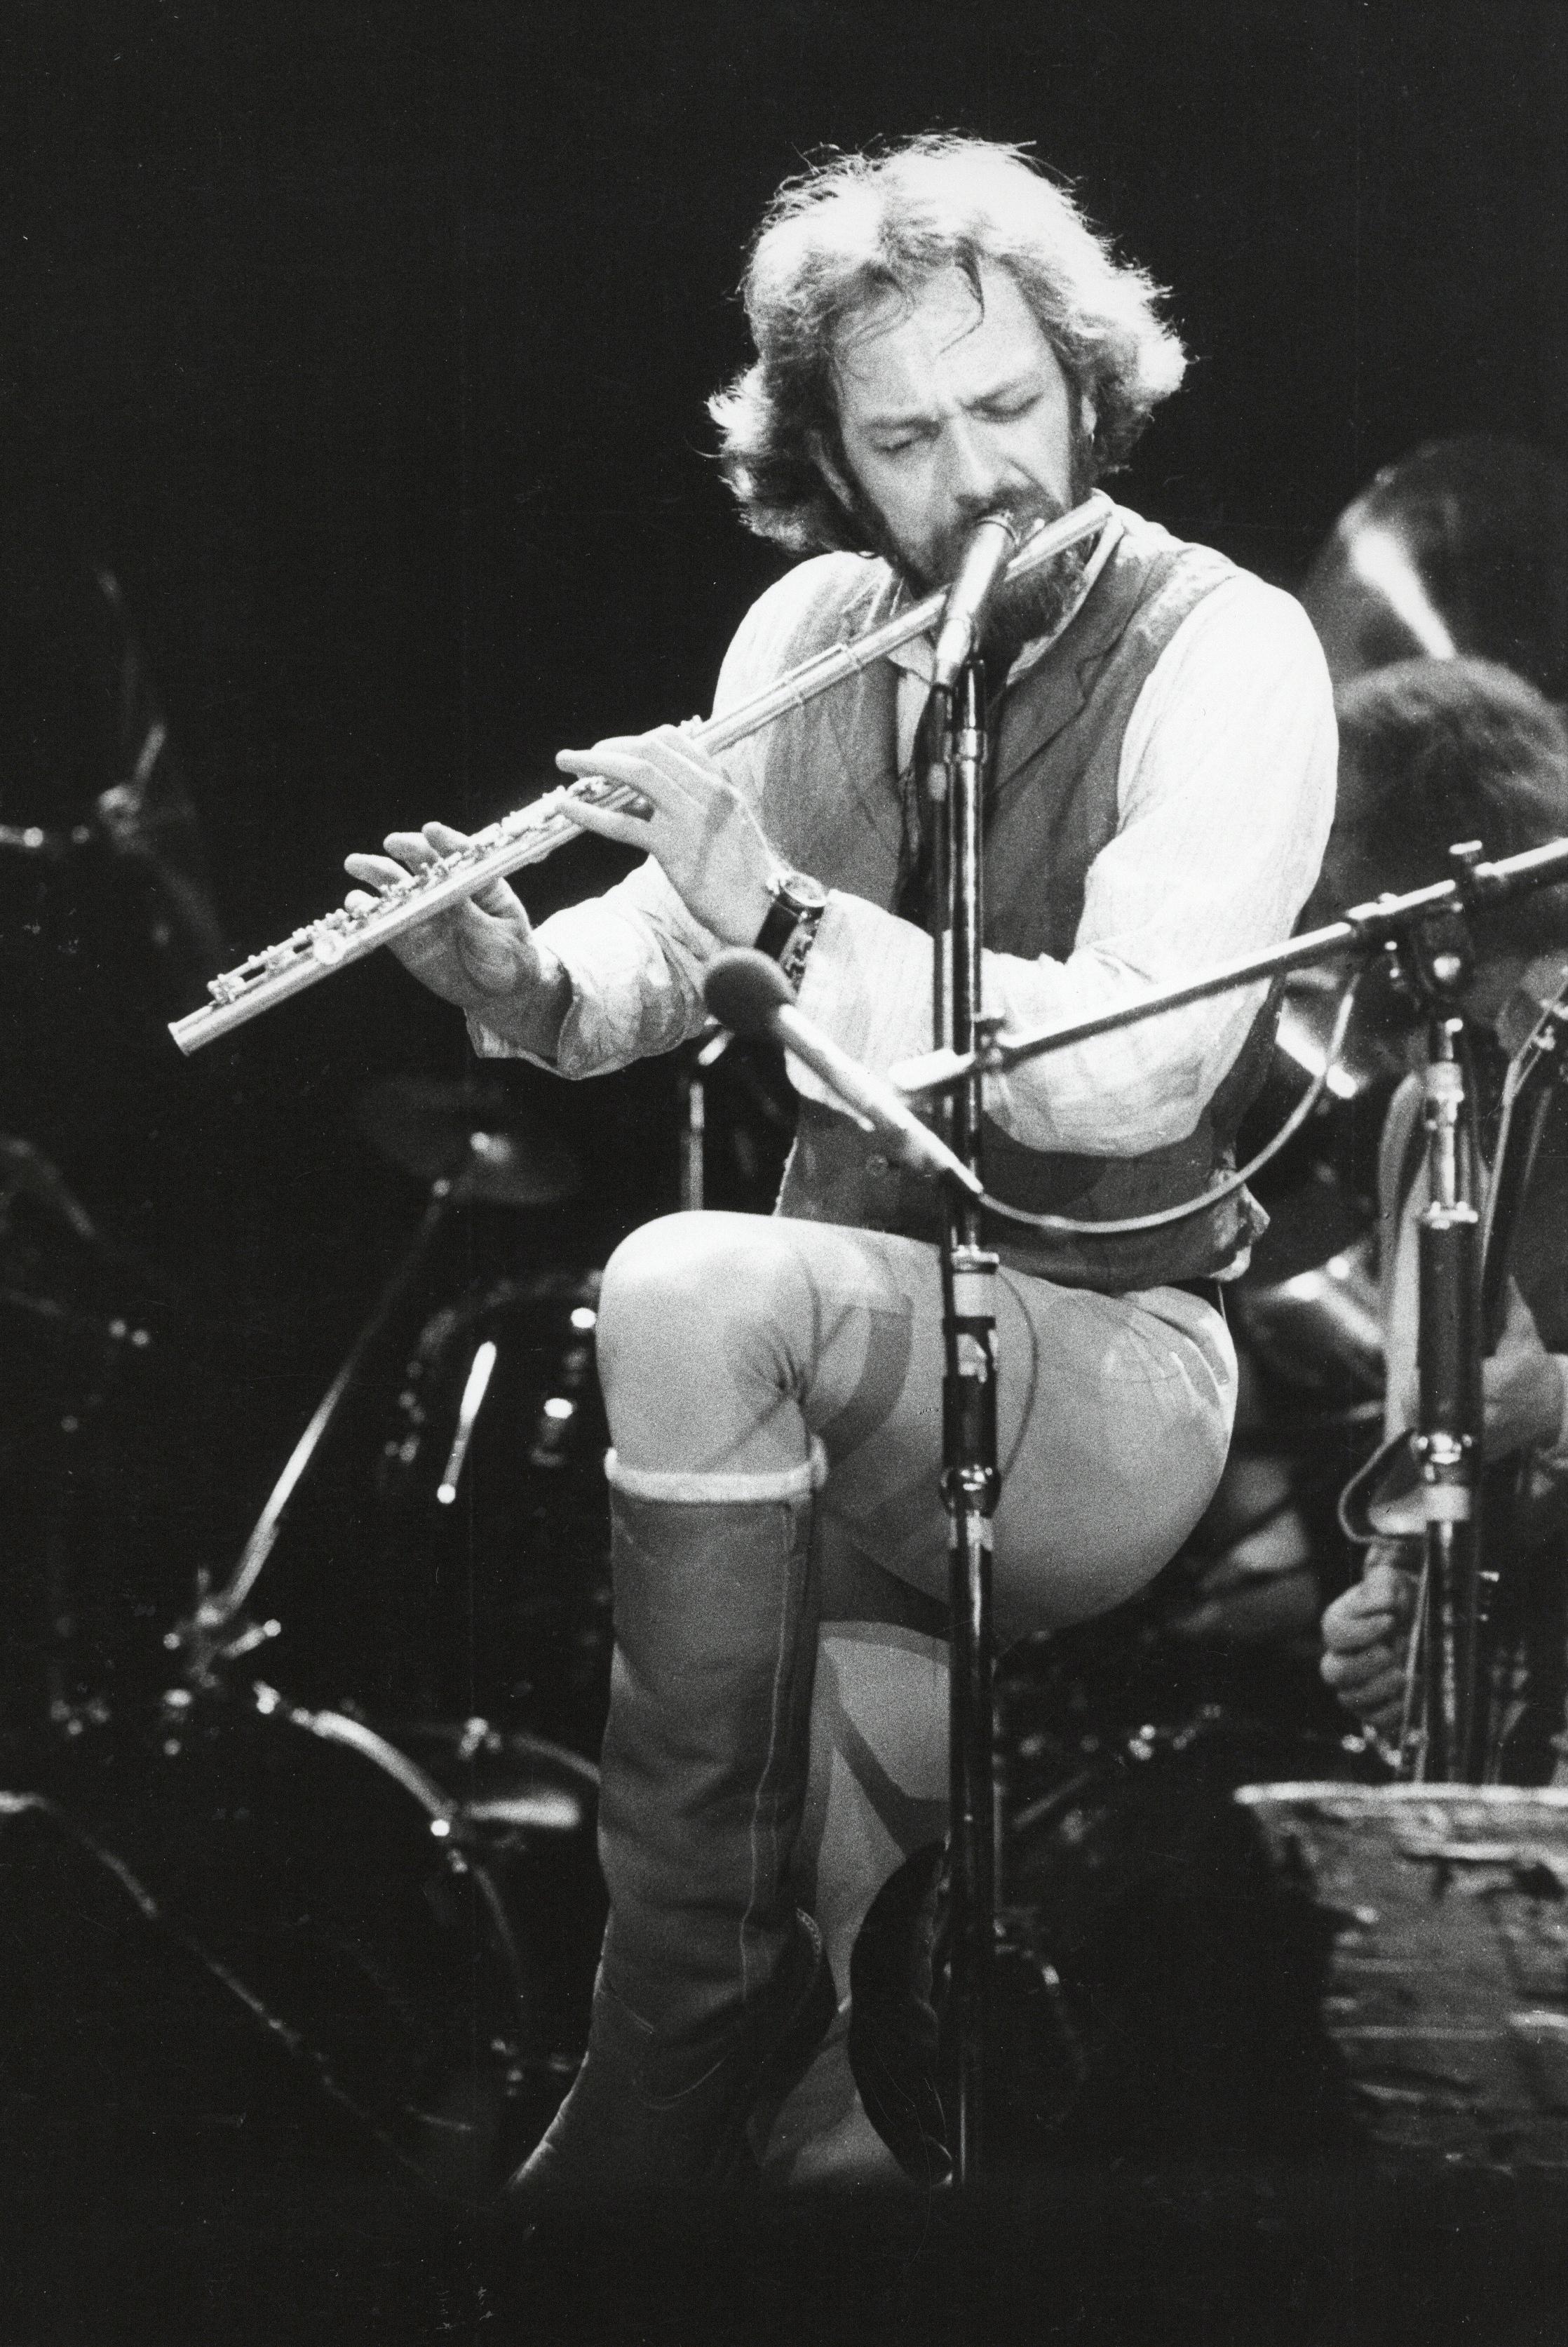 David Hill Black and White Photograph - Ian Anderson of Jethro Tull Playing Flute Vintage Original Photograph